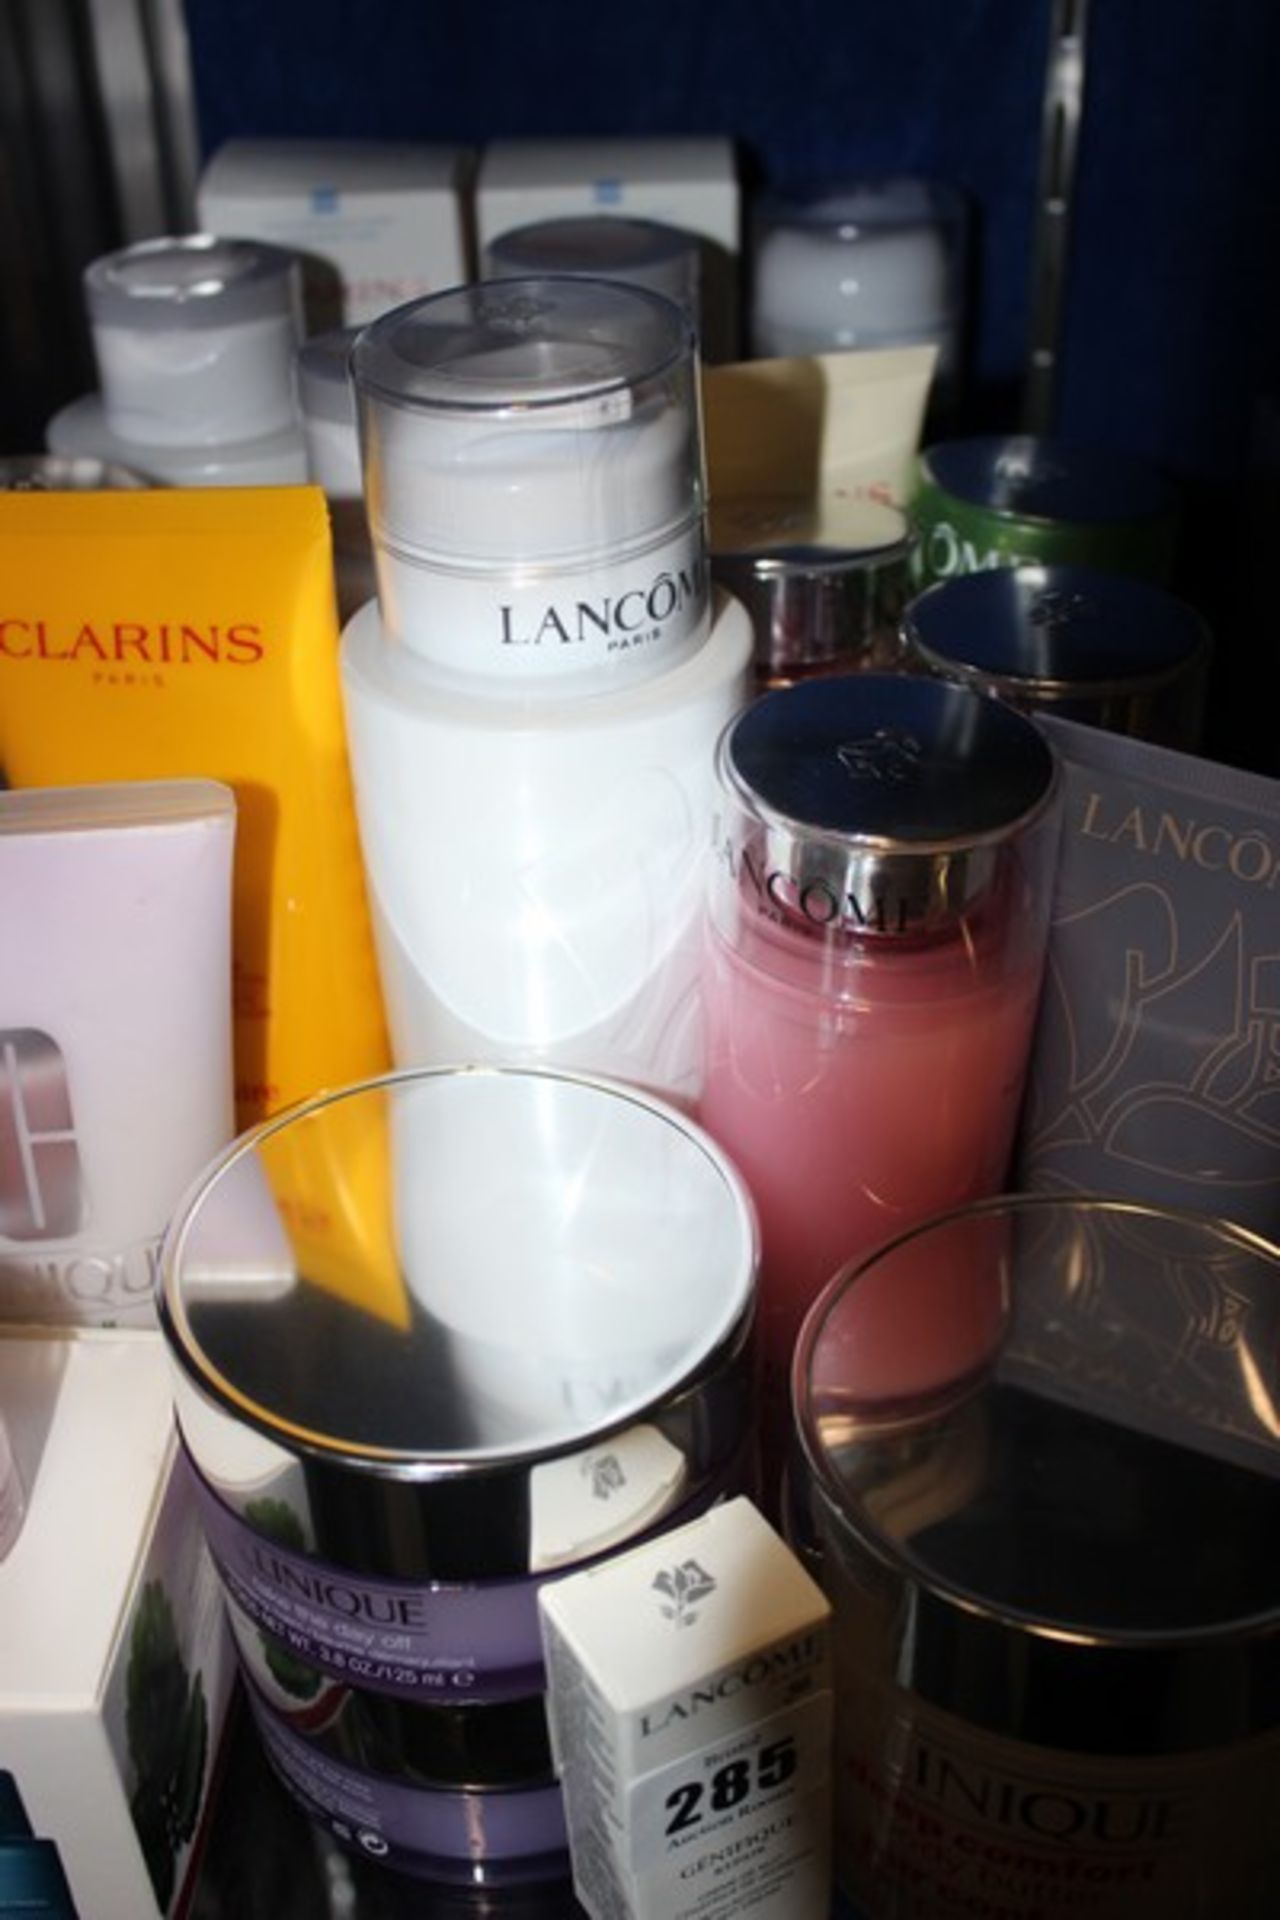 A quantity of Clarins, Lancome and Clinique beauty products (Approximately 20 items).